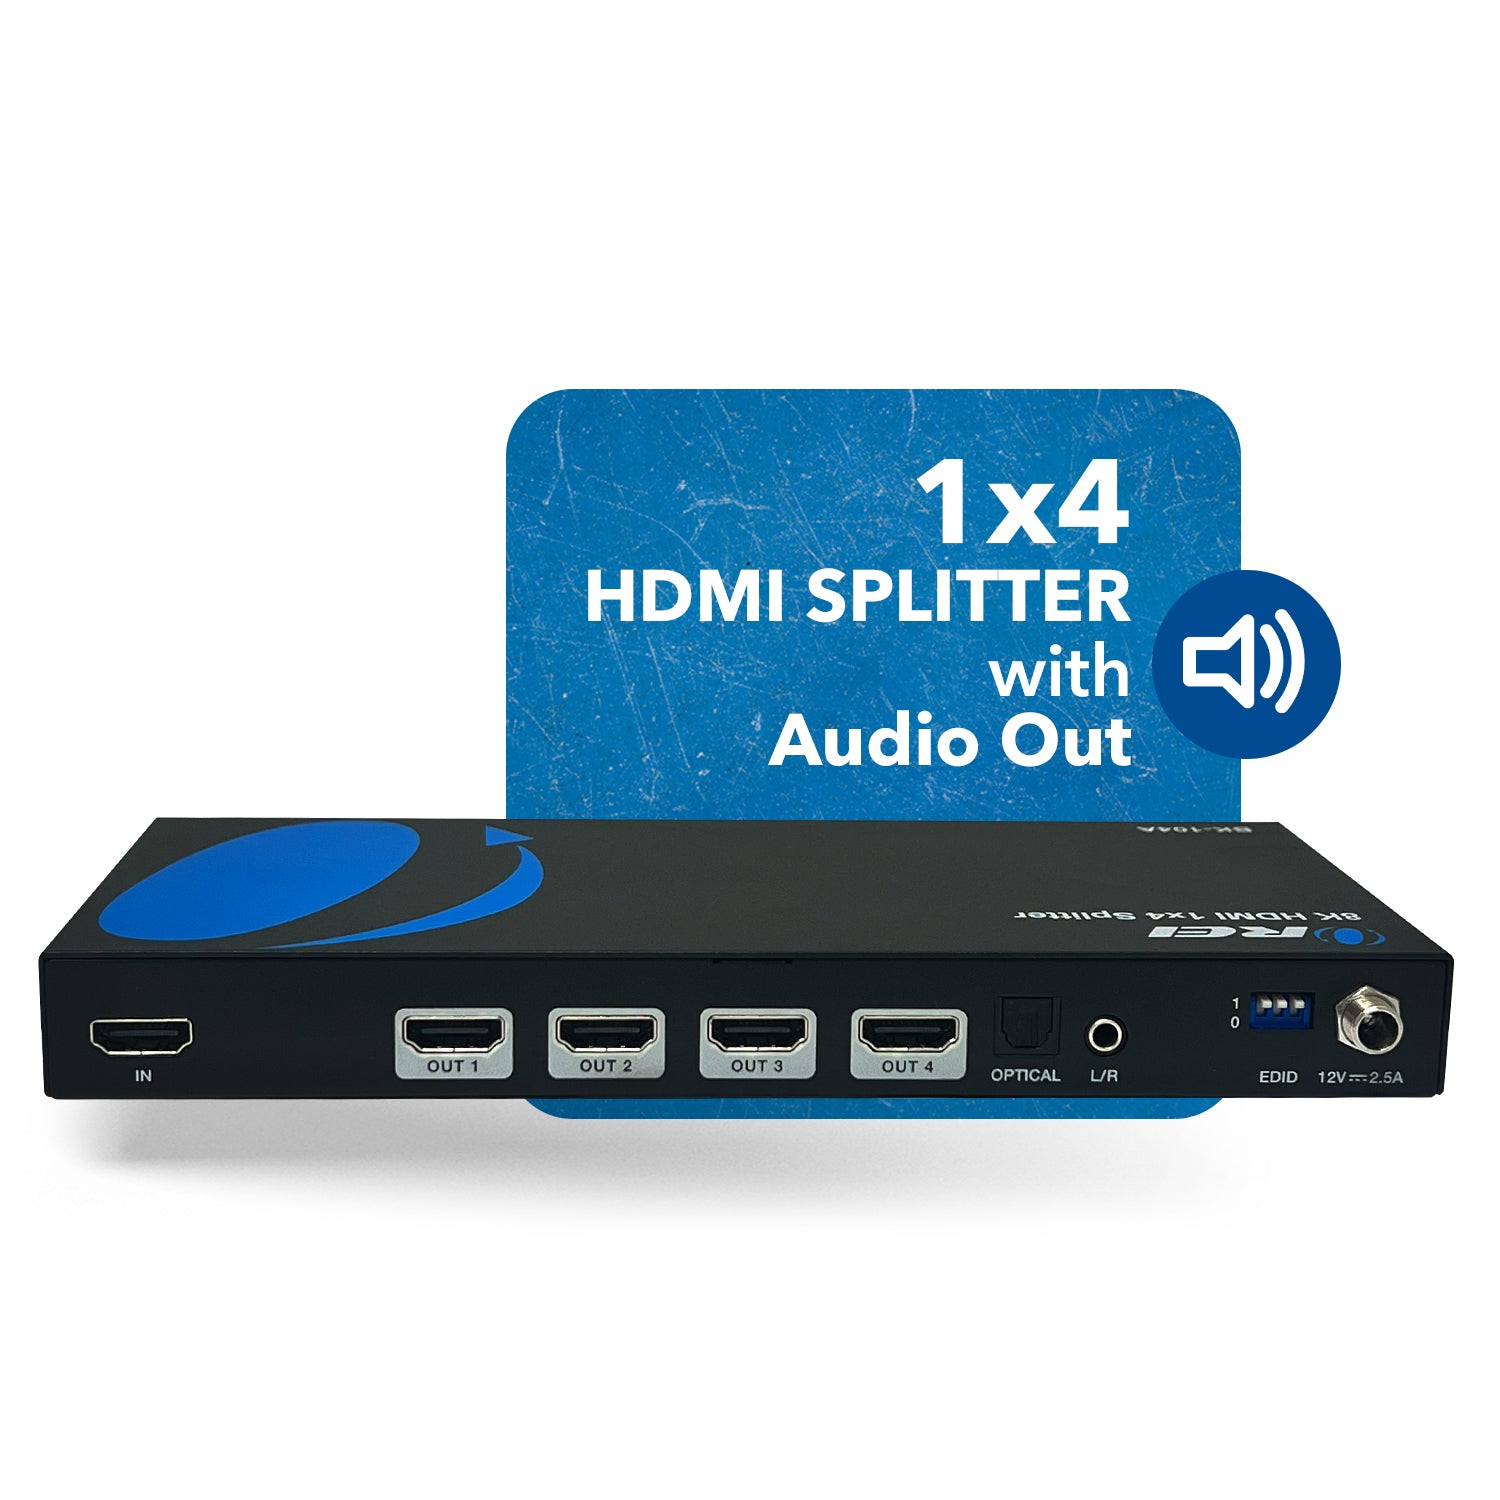 4K-HDR 1x4 Splitter with Audio Extractor (PRO-HDRsplit4P-Aud)